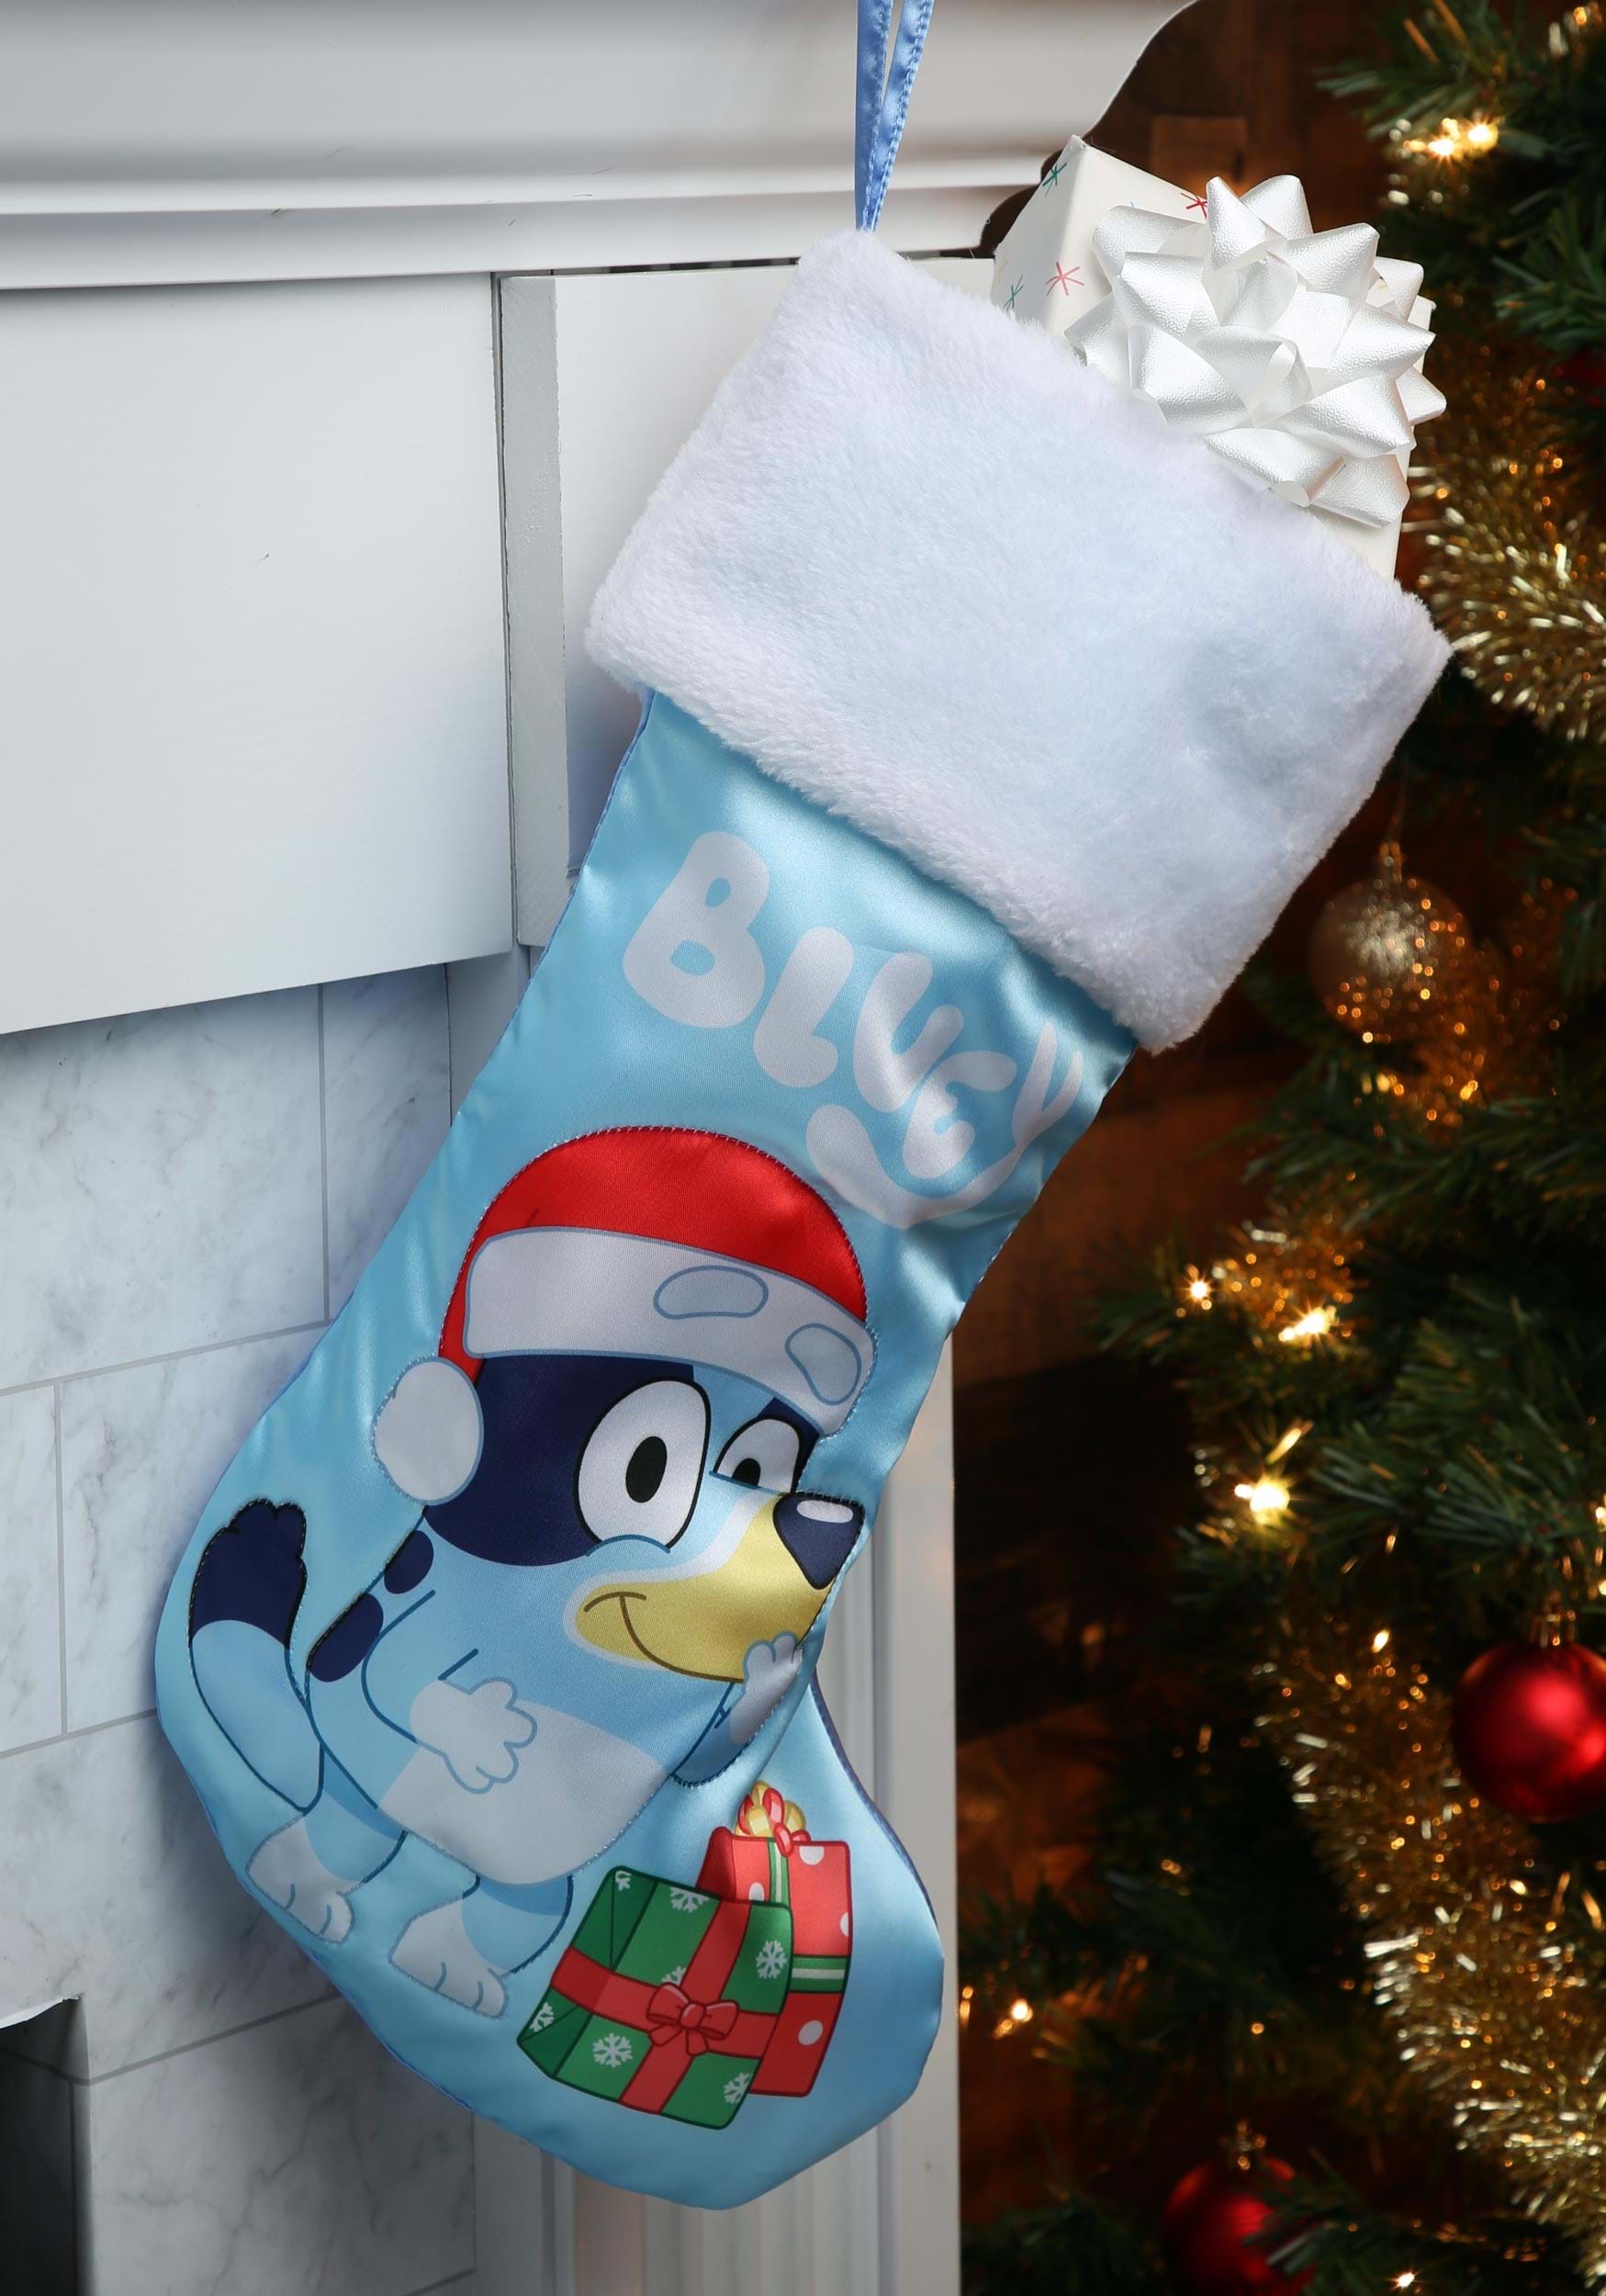 https://images.fun.com/products/74292/1-1/bluey-with-presents-stocking-update.jpg